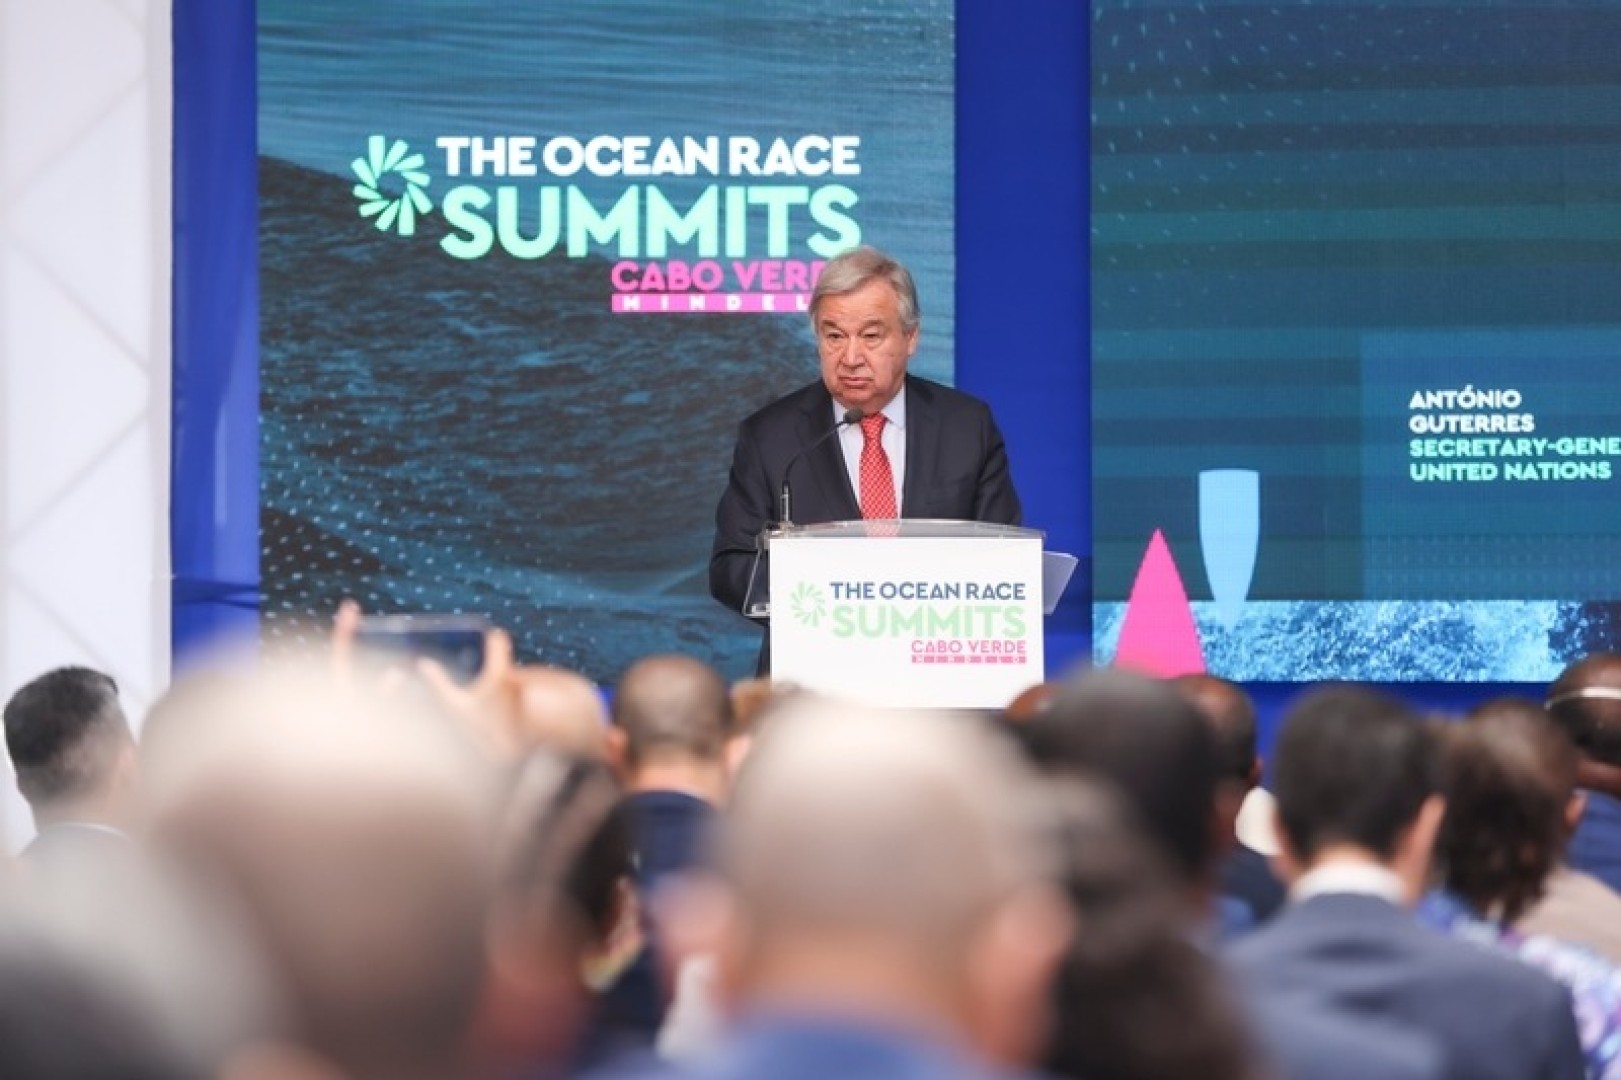 UN Secretary-General António Guterres at The Ocean Race Summit Mindelo, 23 January 2023
© Sailing Energy / The Ocean Race